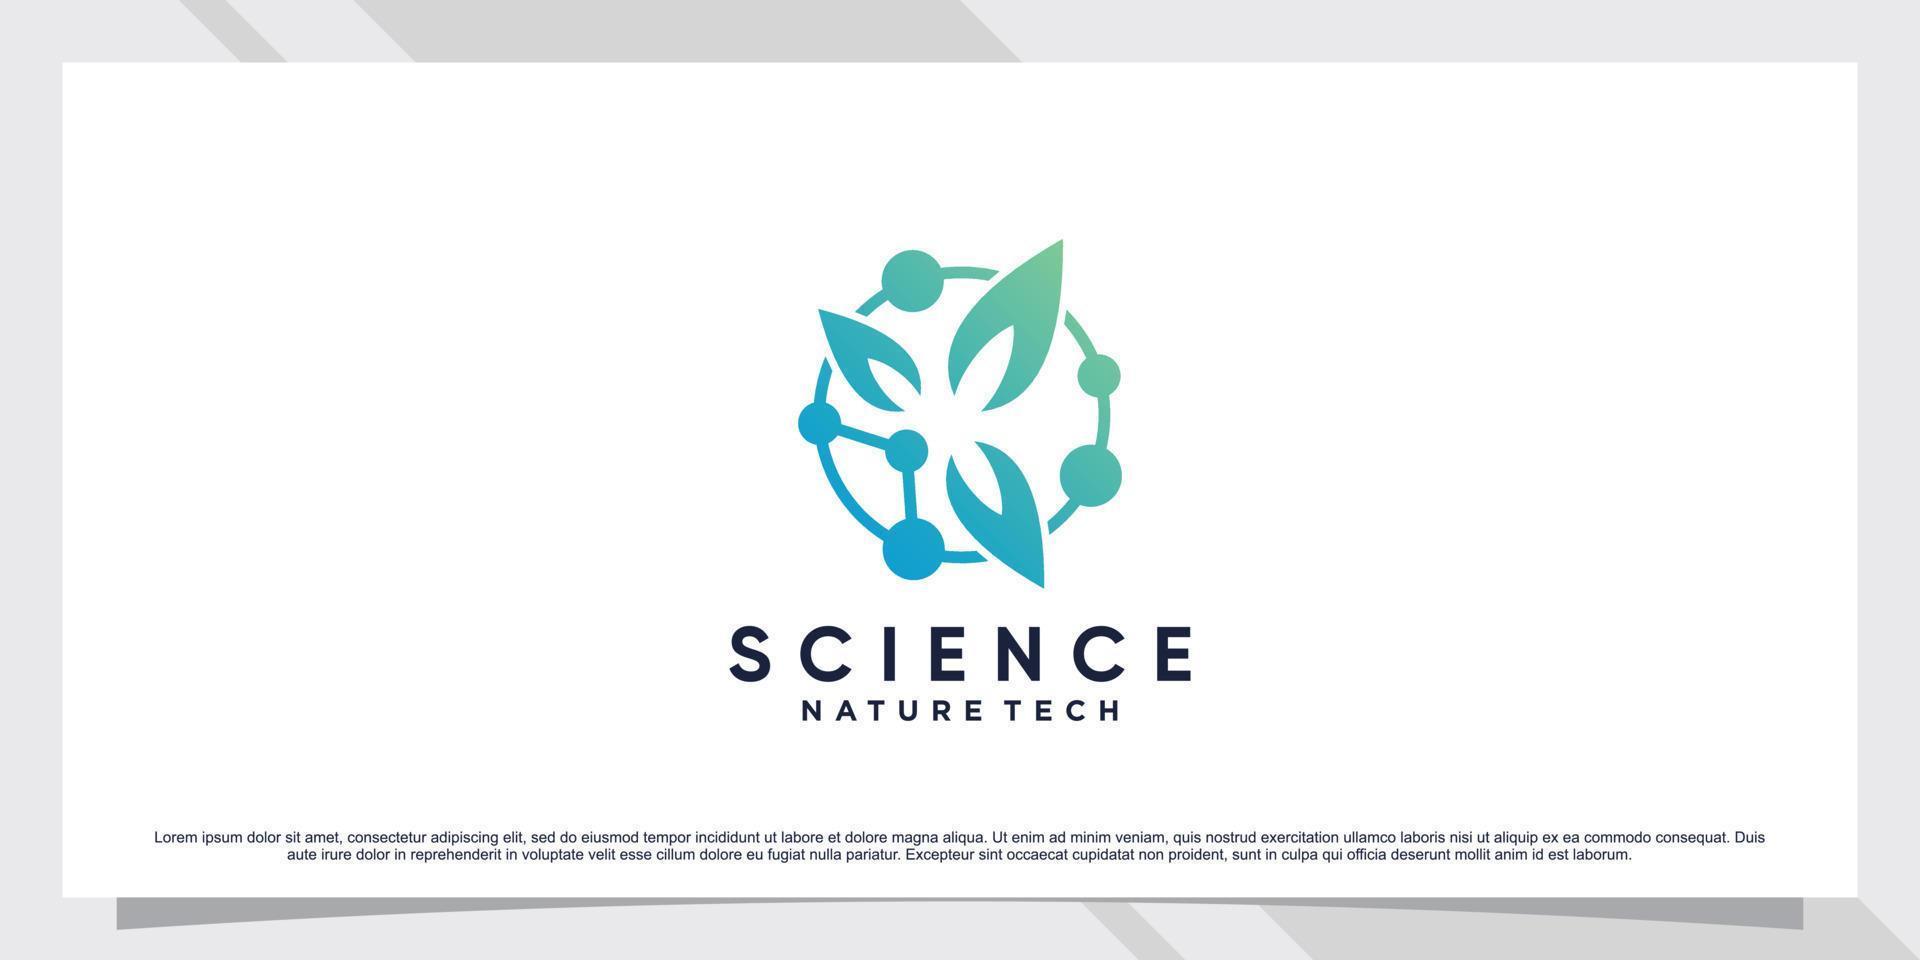 Science molecule logo design for technology with leaf and shape concept vector